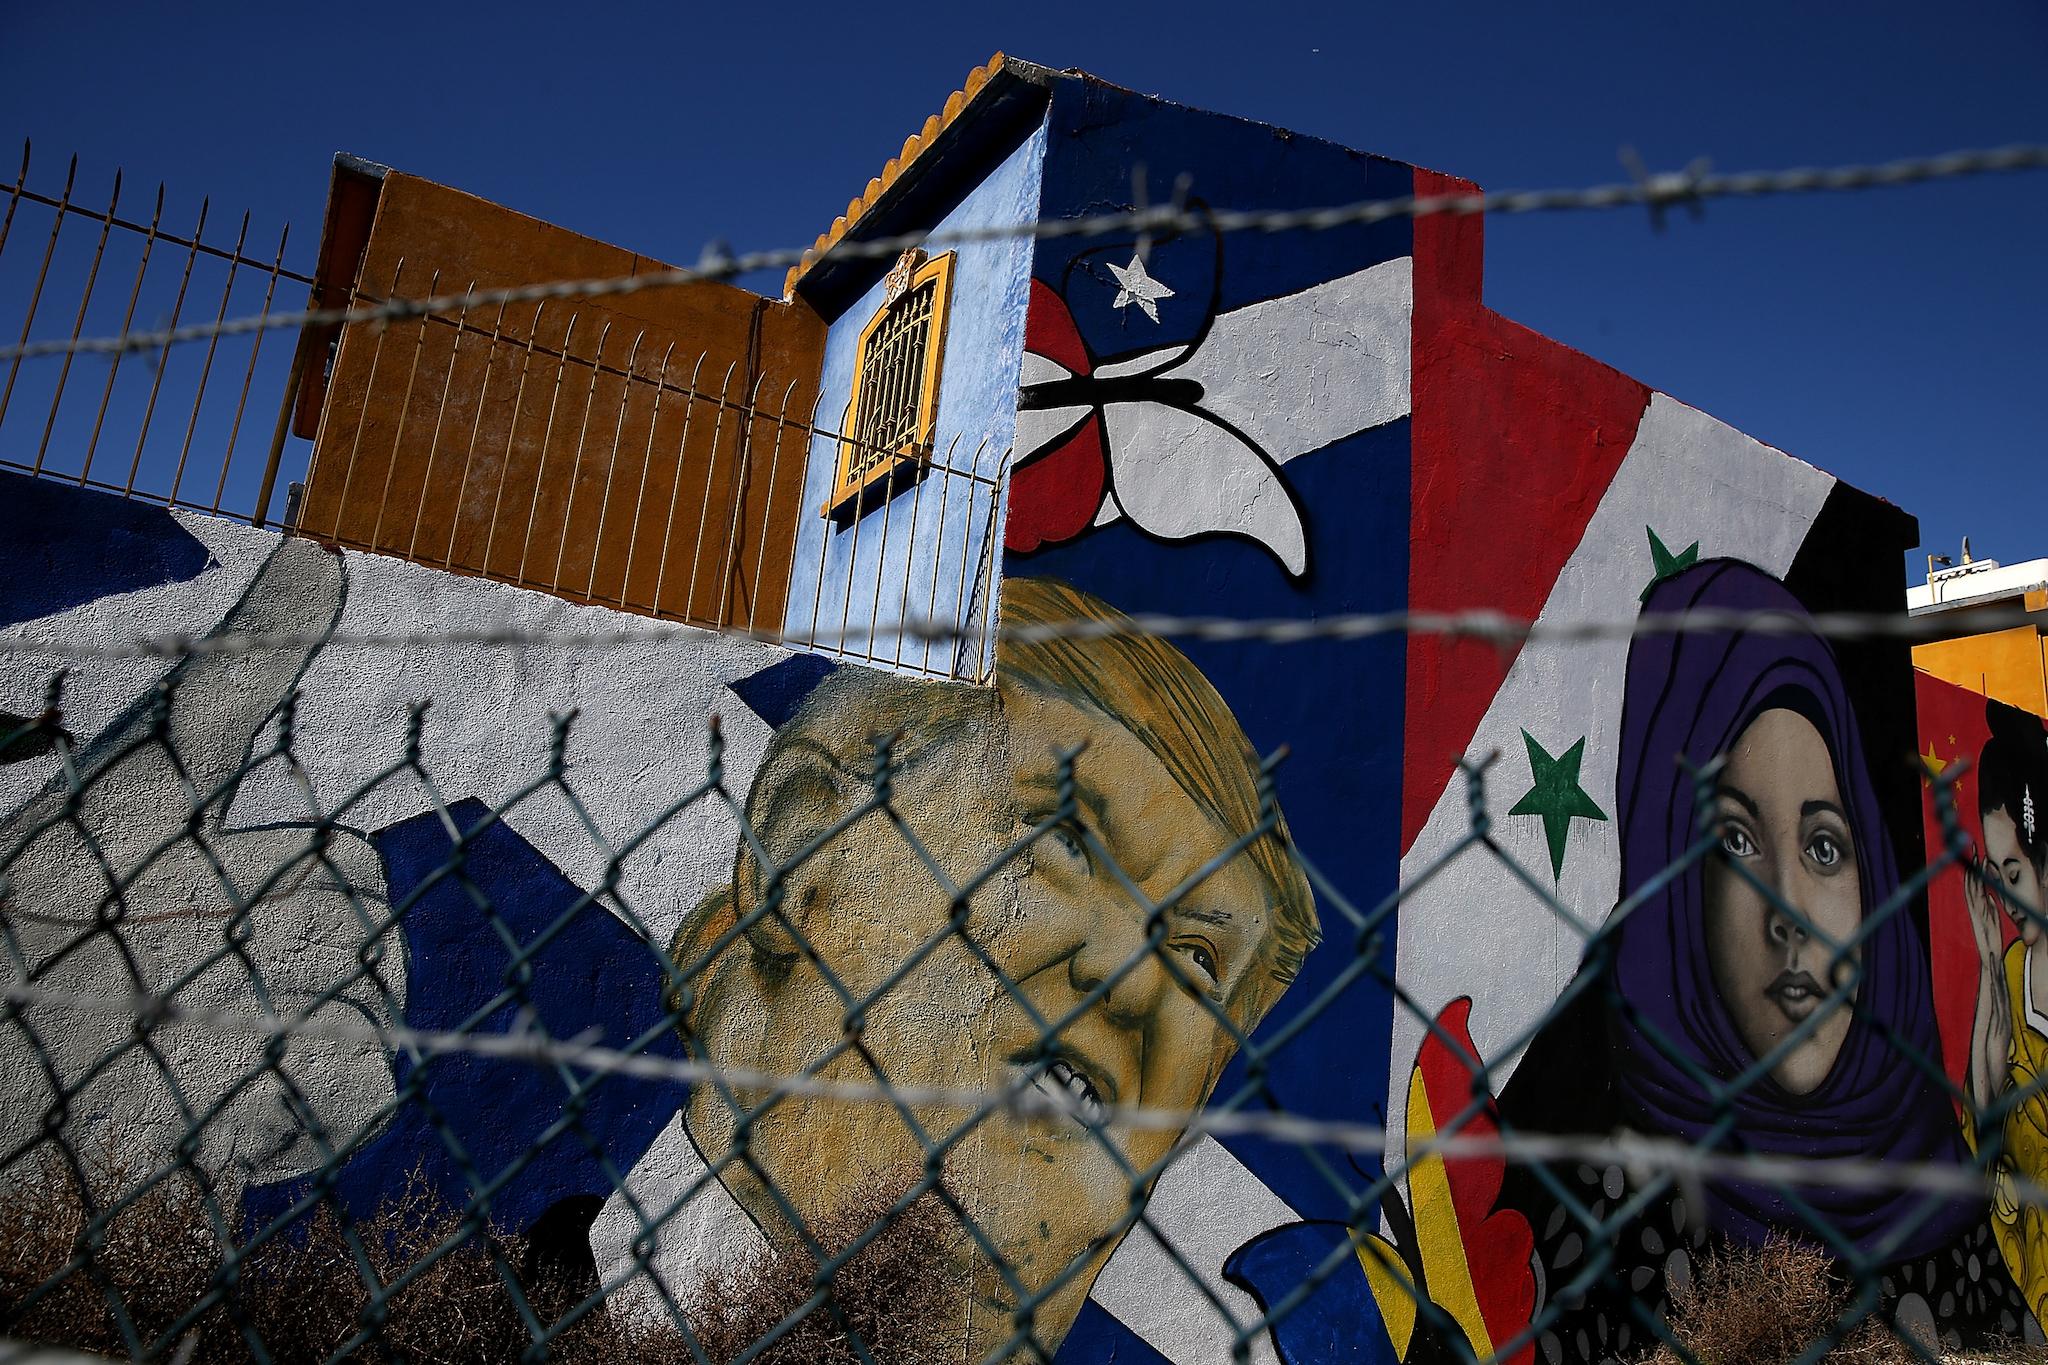 A mural of U.S. President Donald Trump is displayed on the side of a home on January 27, 2017 in Tijuana, Mexico